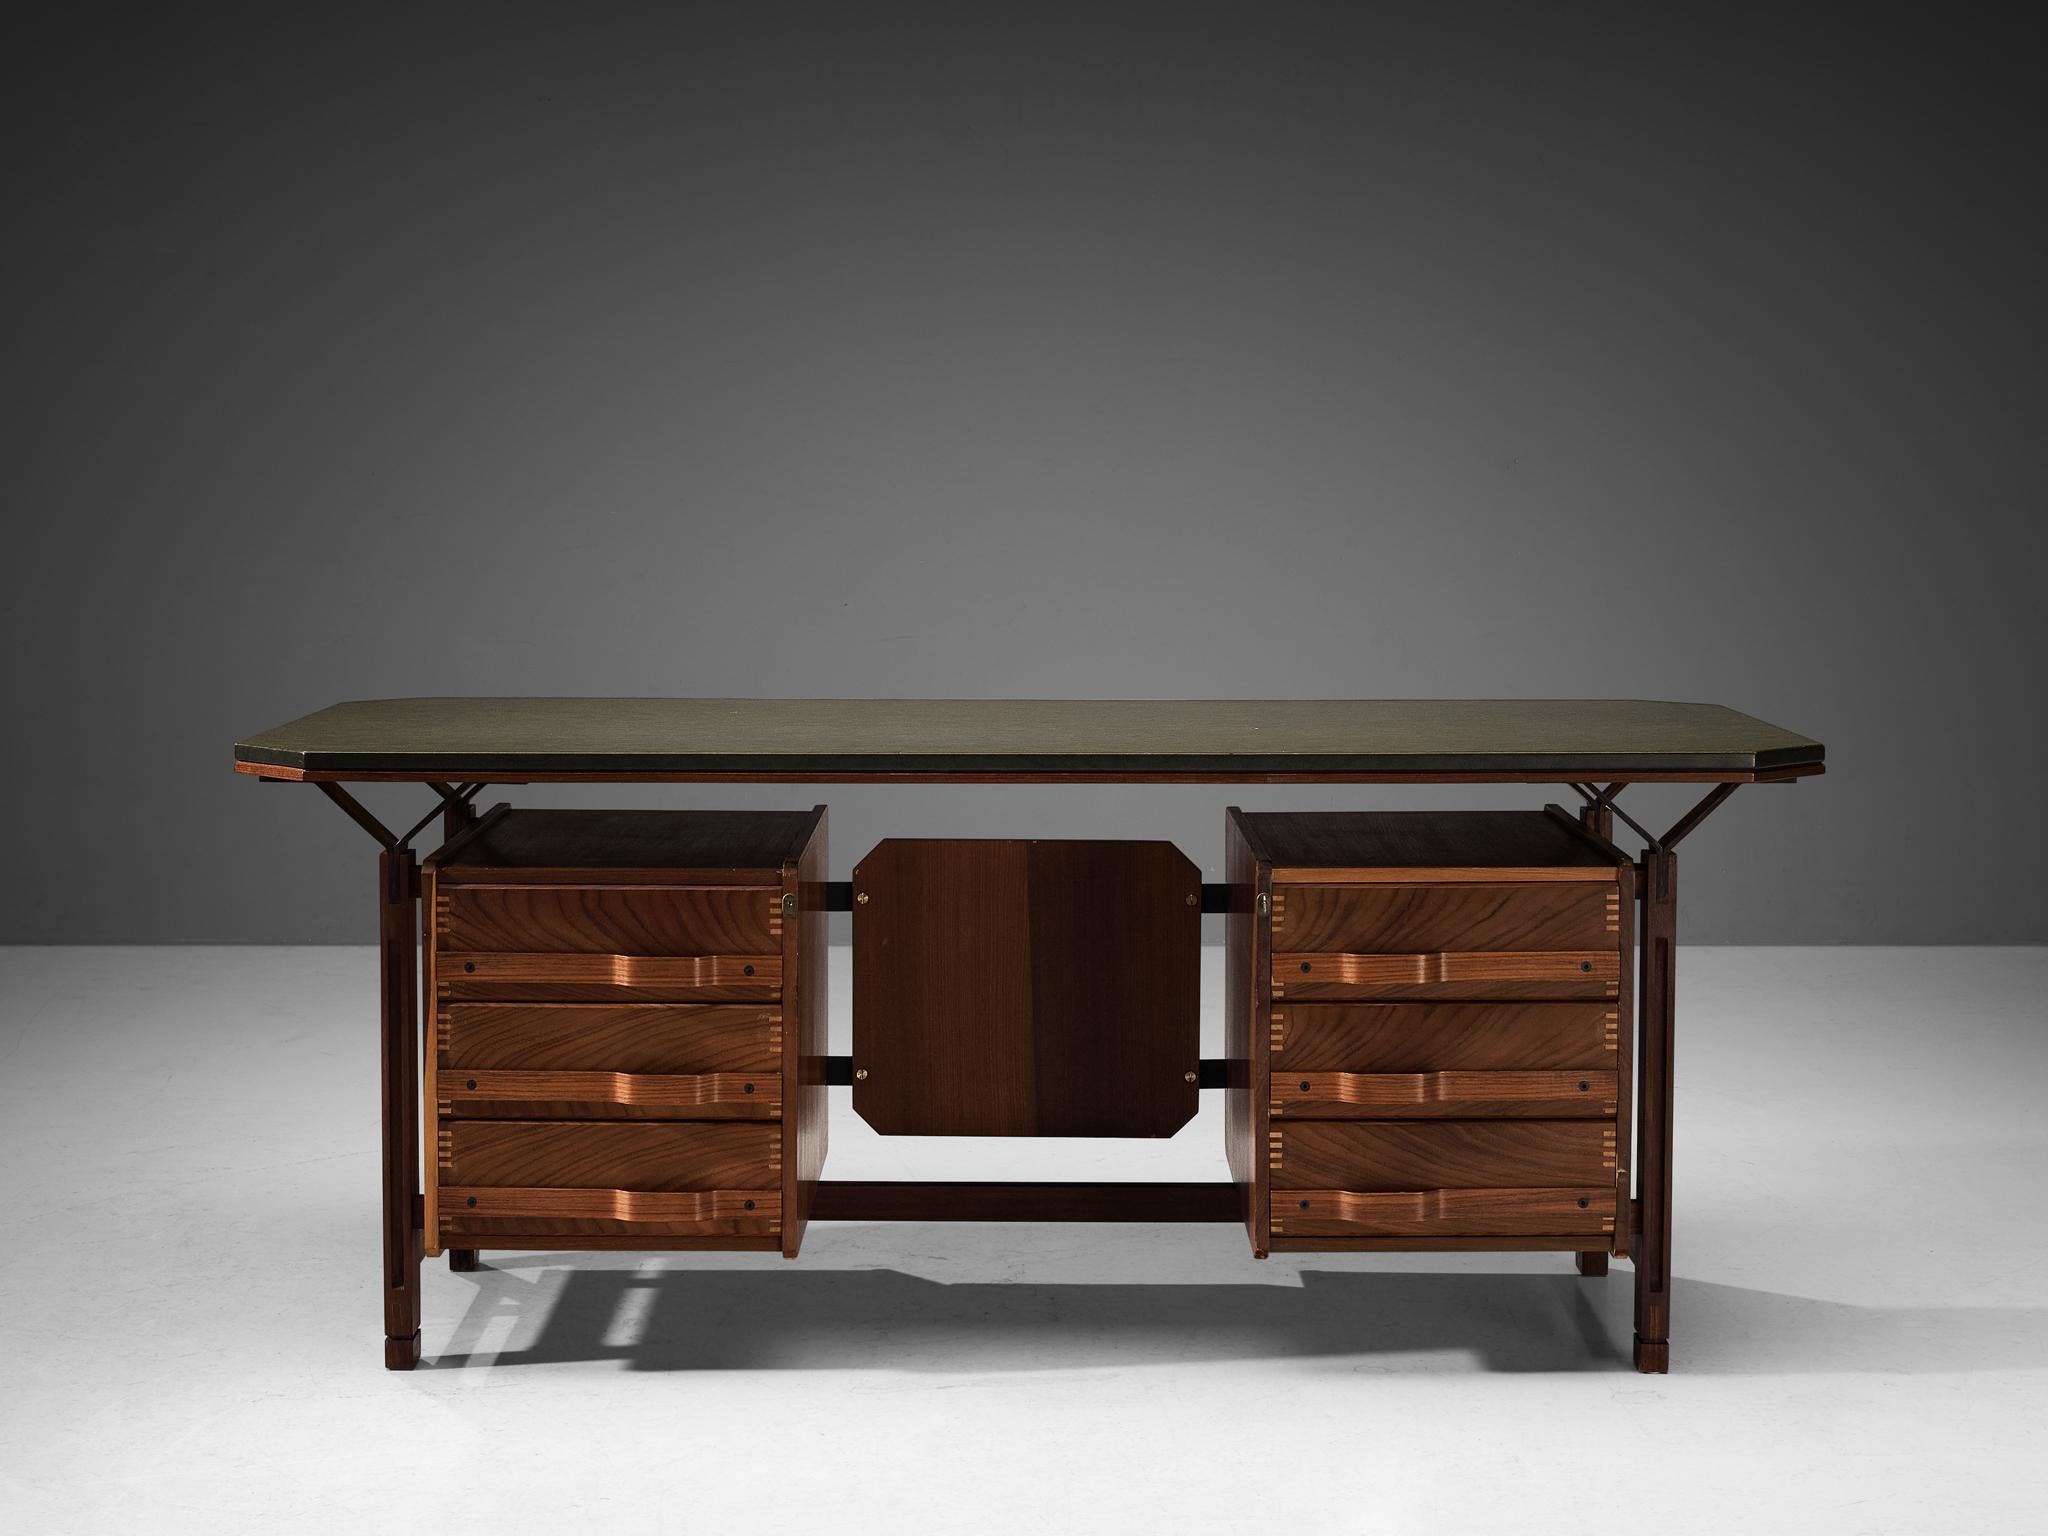 Writing desk, teak, vinyl, brass, plywood, beech, Italy, circa. 1960

This highly refined desk that originates from Italy strongly resembles the work by the acknowledged master of Italian mid-century design Ico Parisi (1916-1996). His design